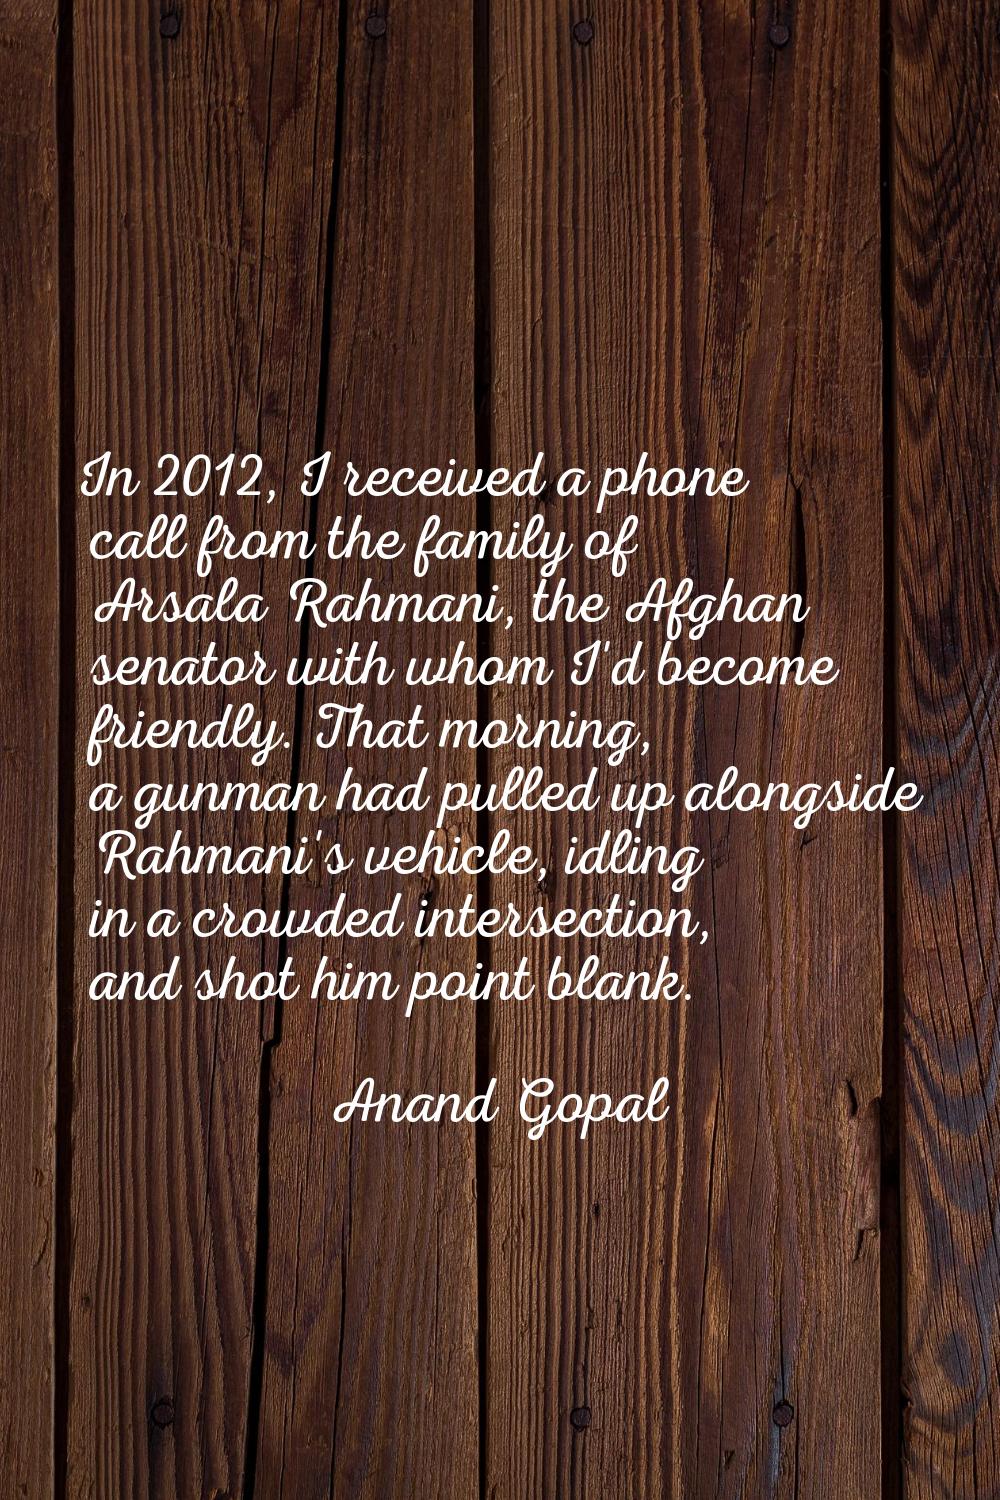 In 2012, I received a phone call from the family of Arsala Rahmani, the Afghan senator with whom I'